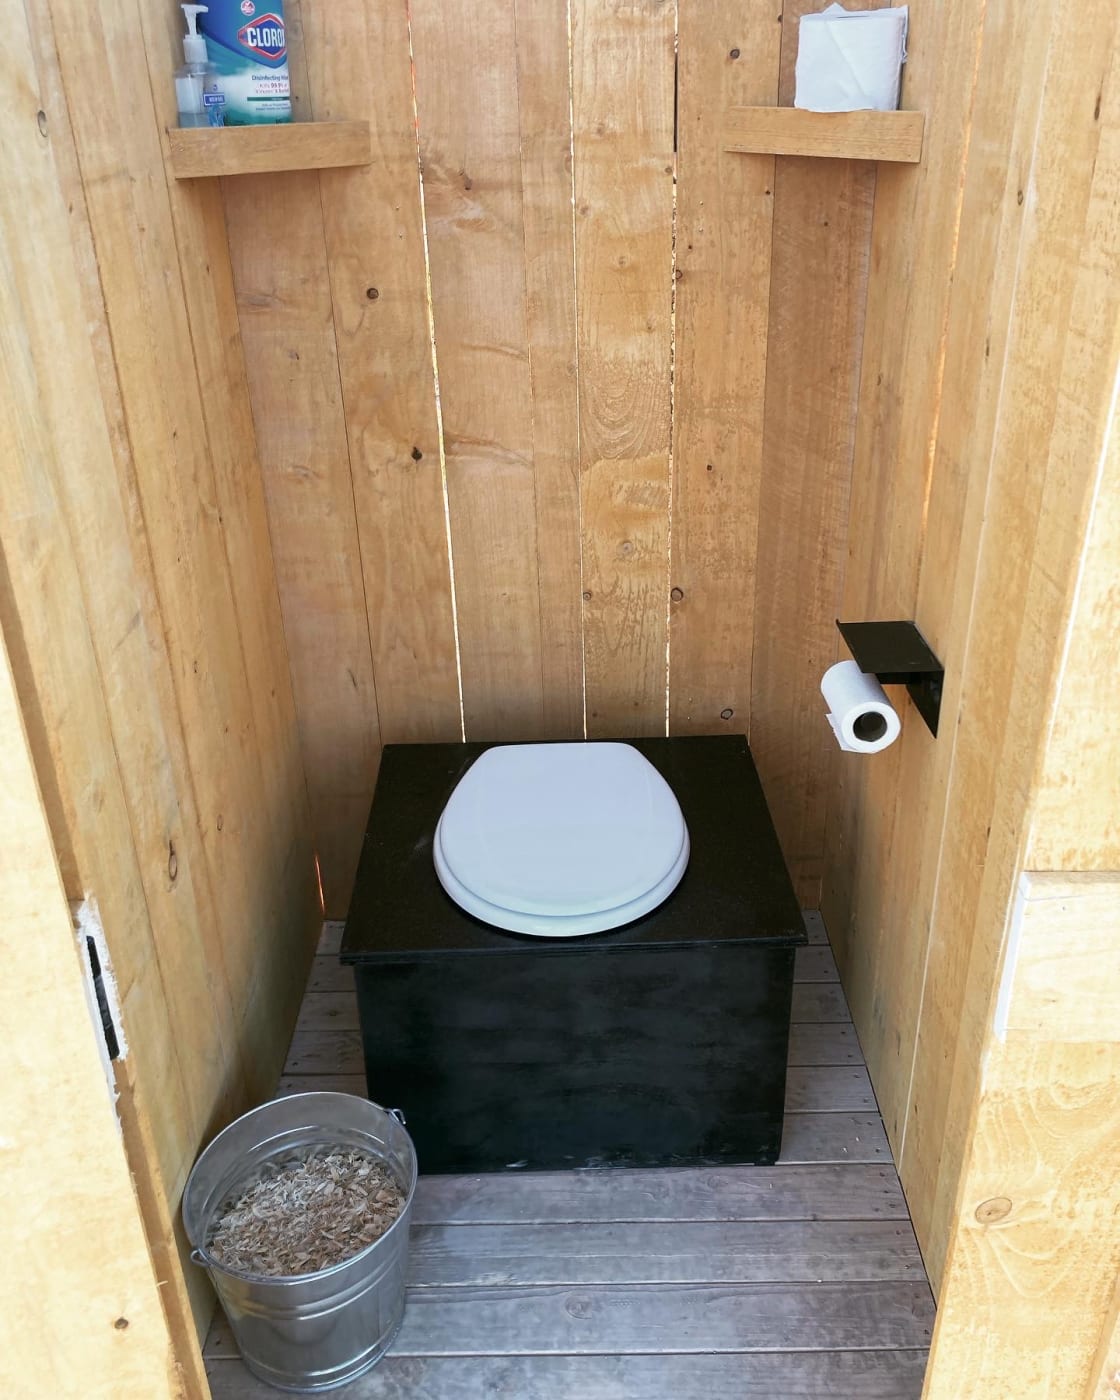 Private composting toilets